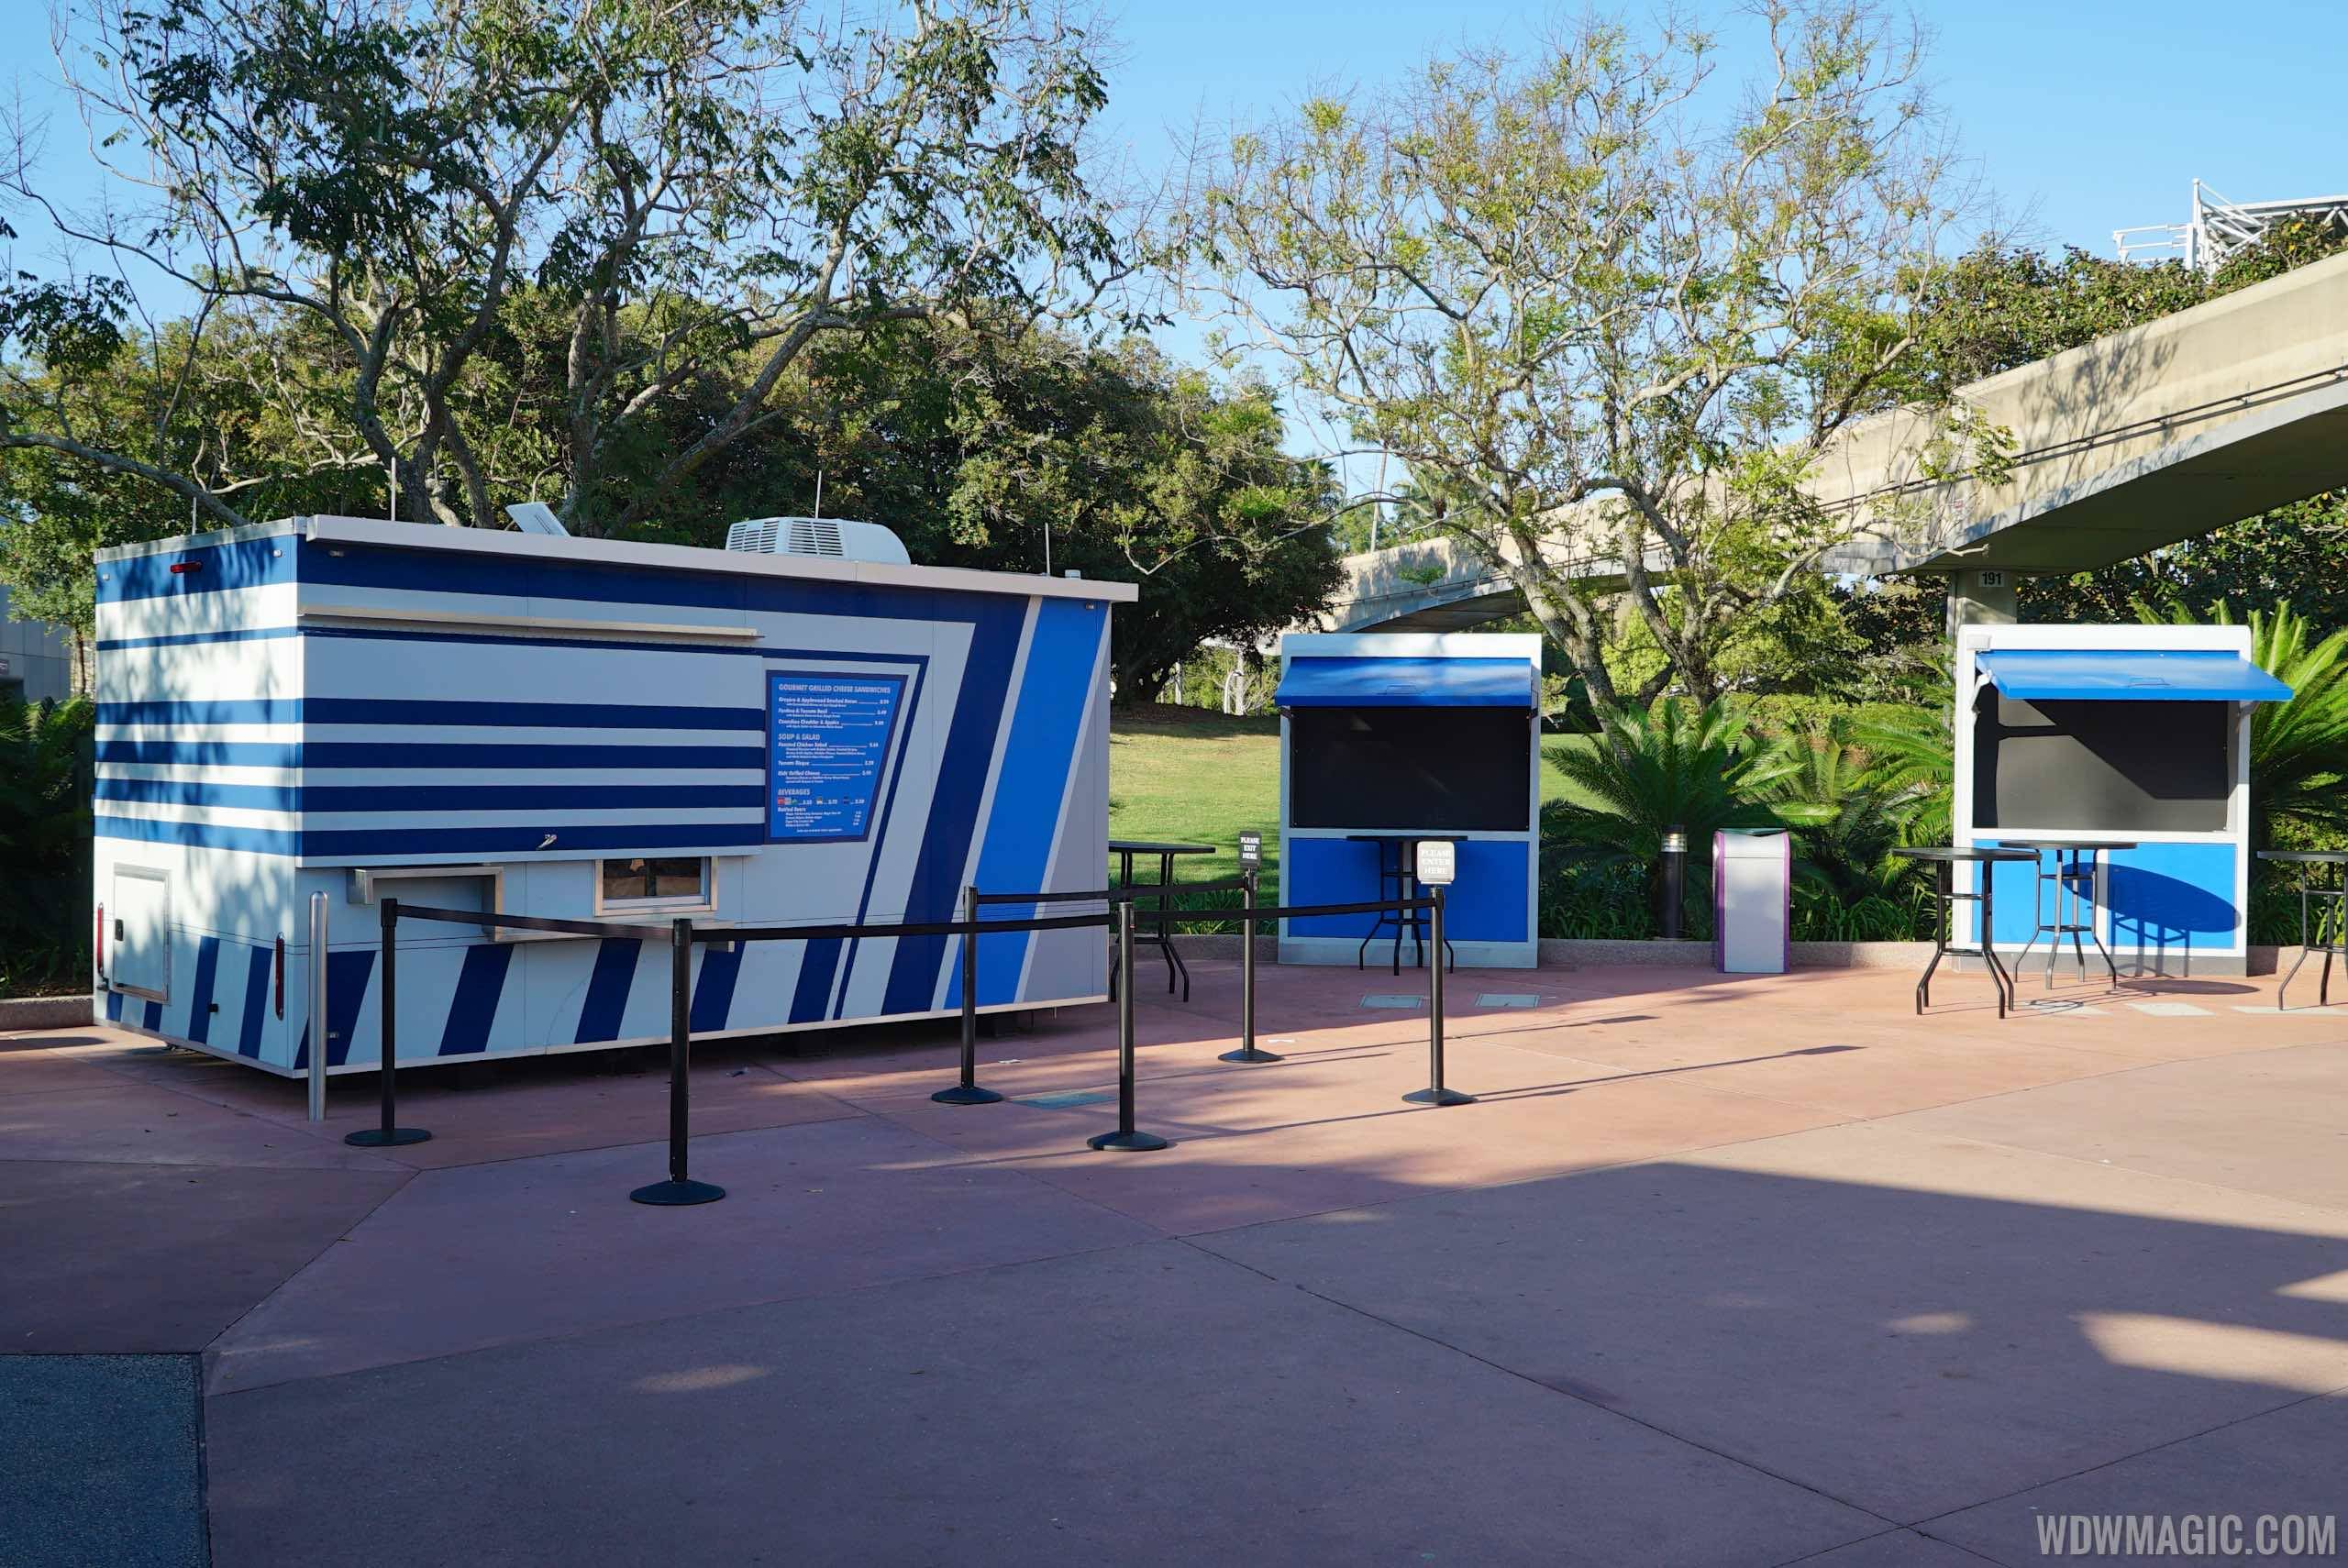 PHOTOS - 'Taste Track' brings gourmet grilled cheese sandwiches to Epcot